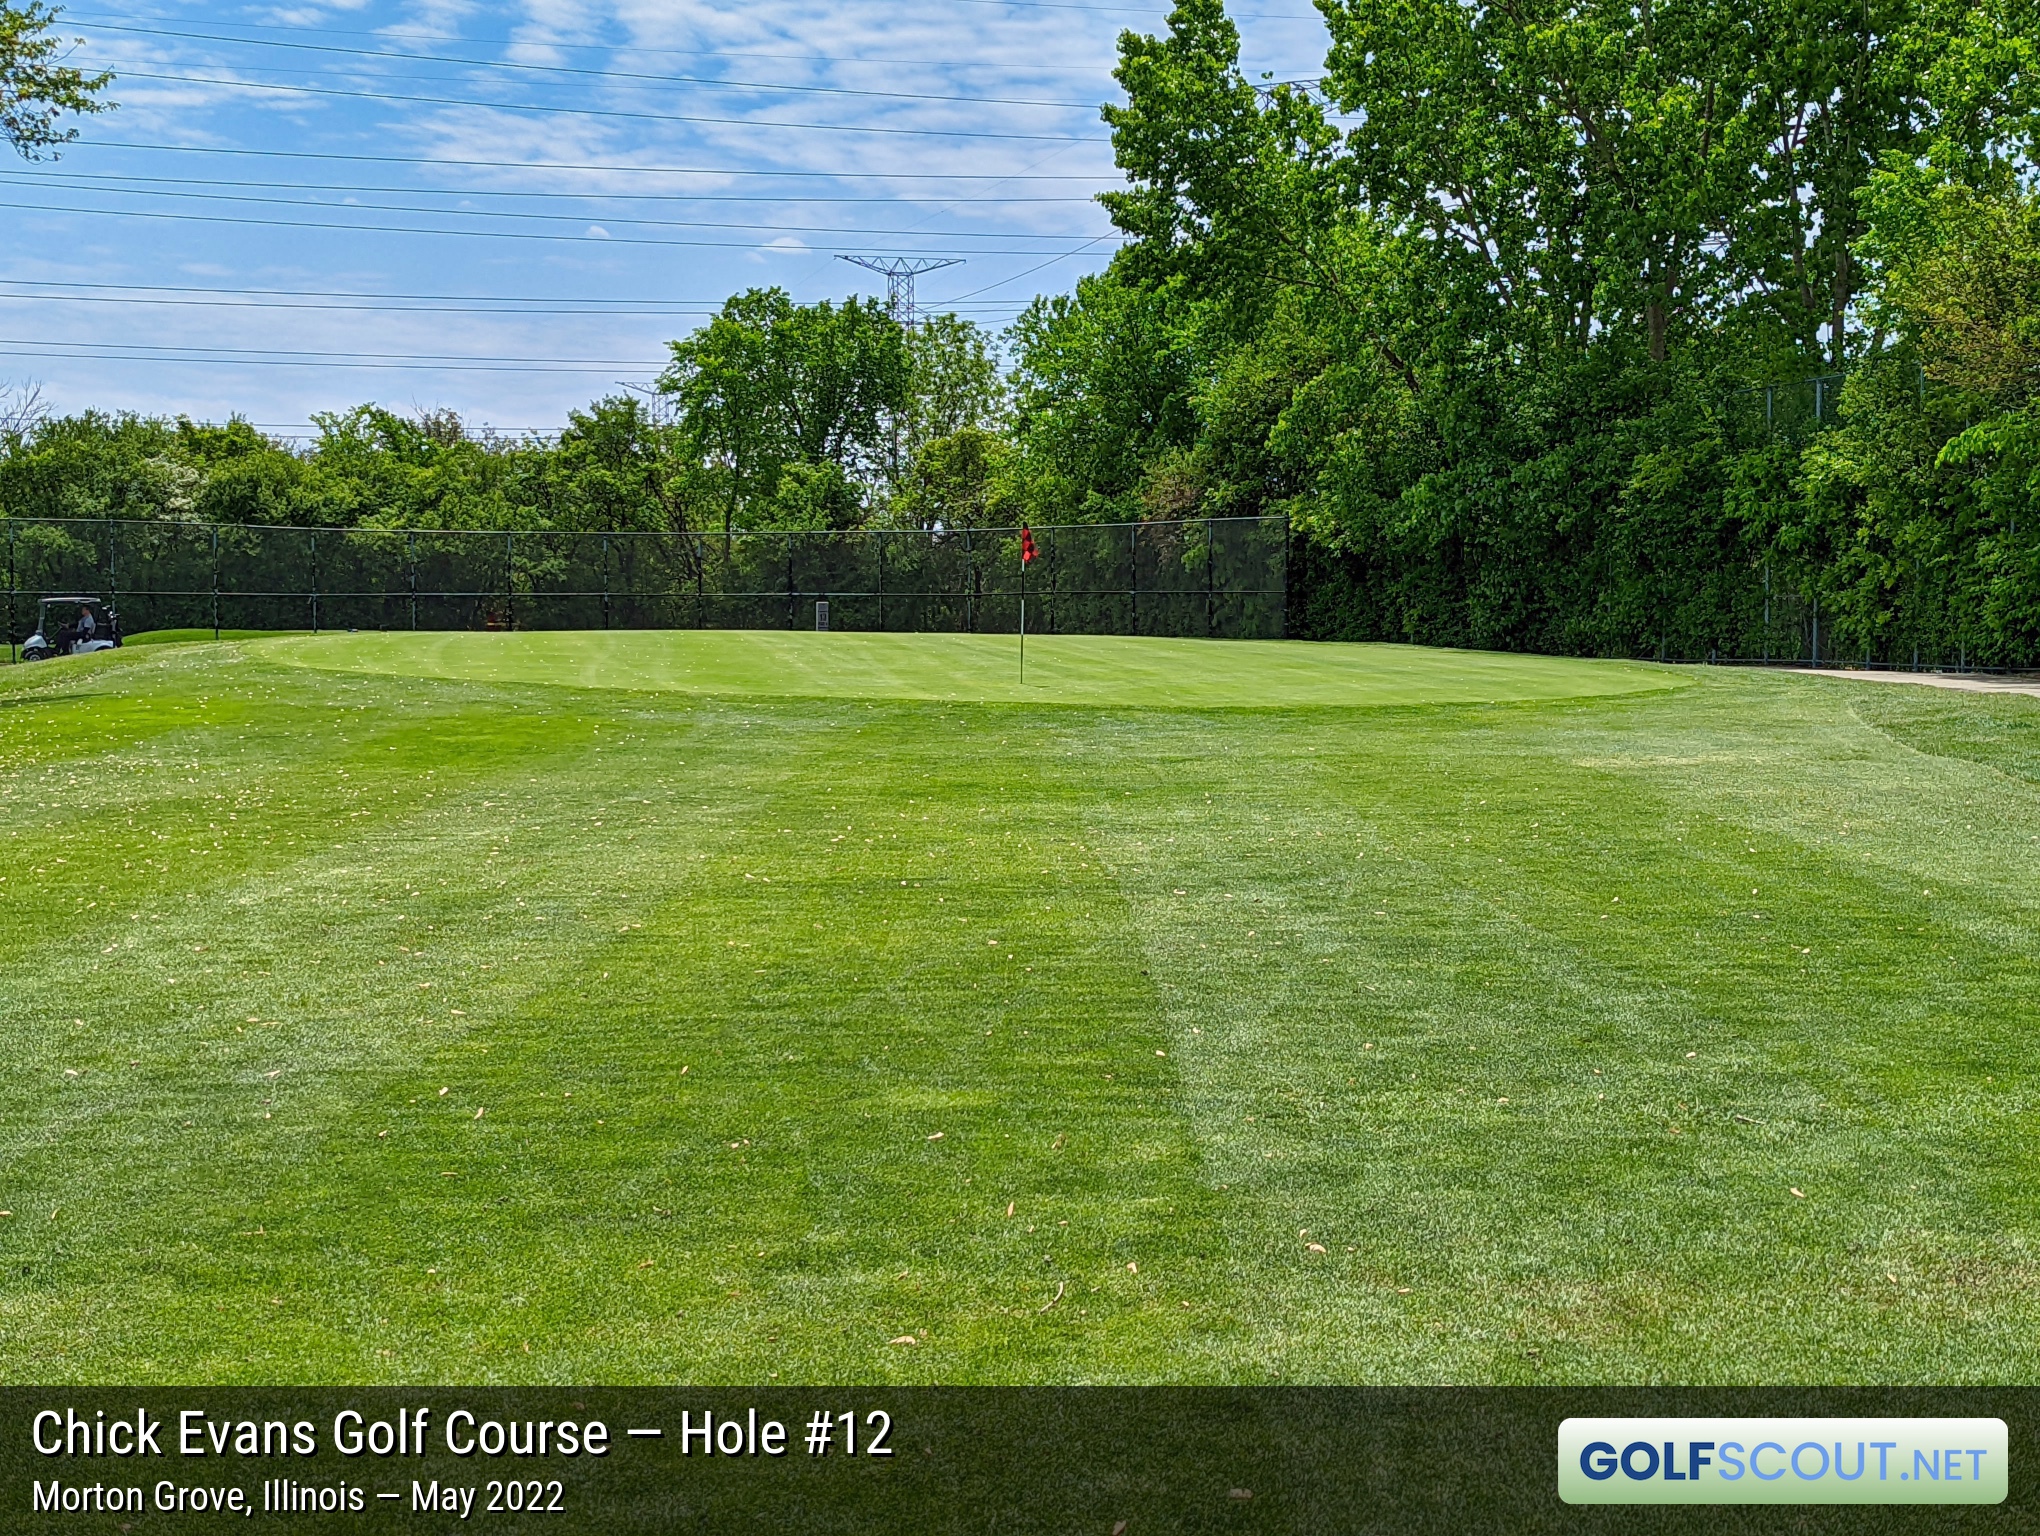 Photo of hole #12 at Chick Evans Golf Course in Morton Grove, Illinois. 